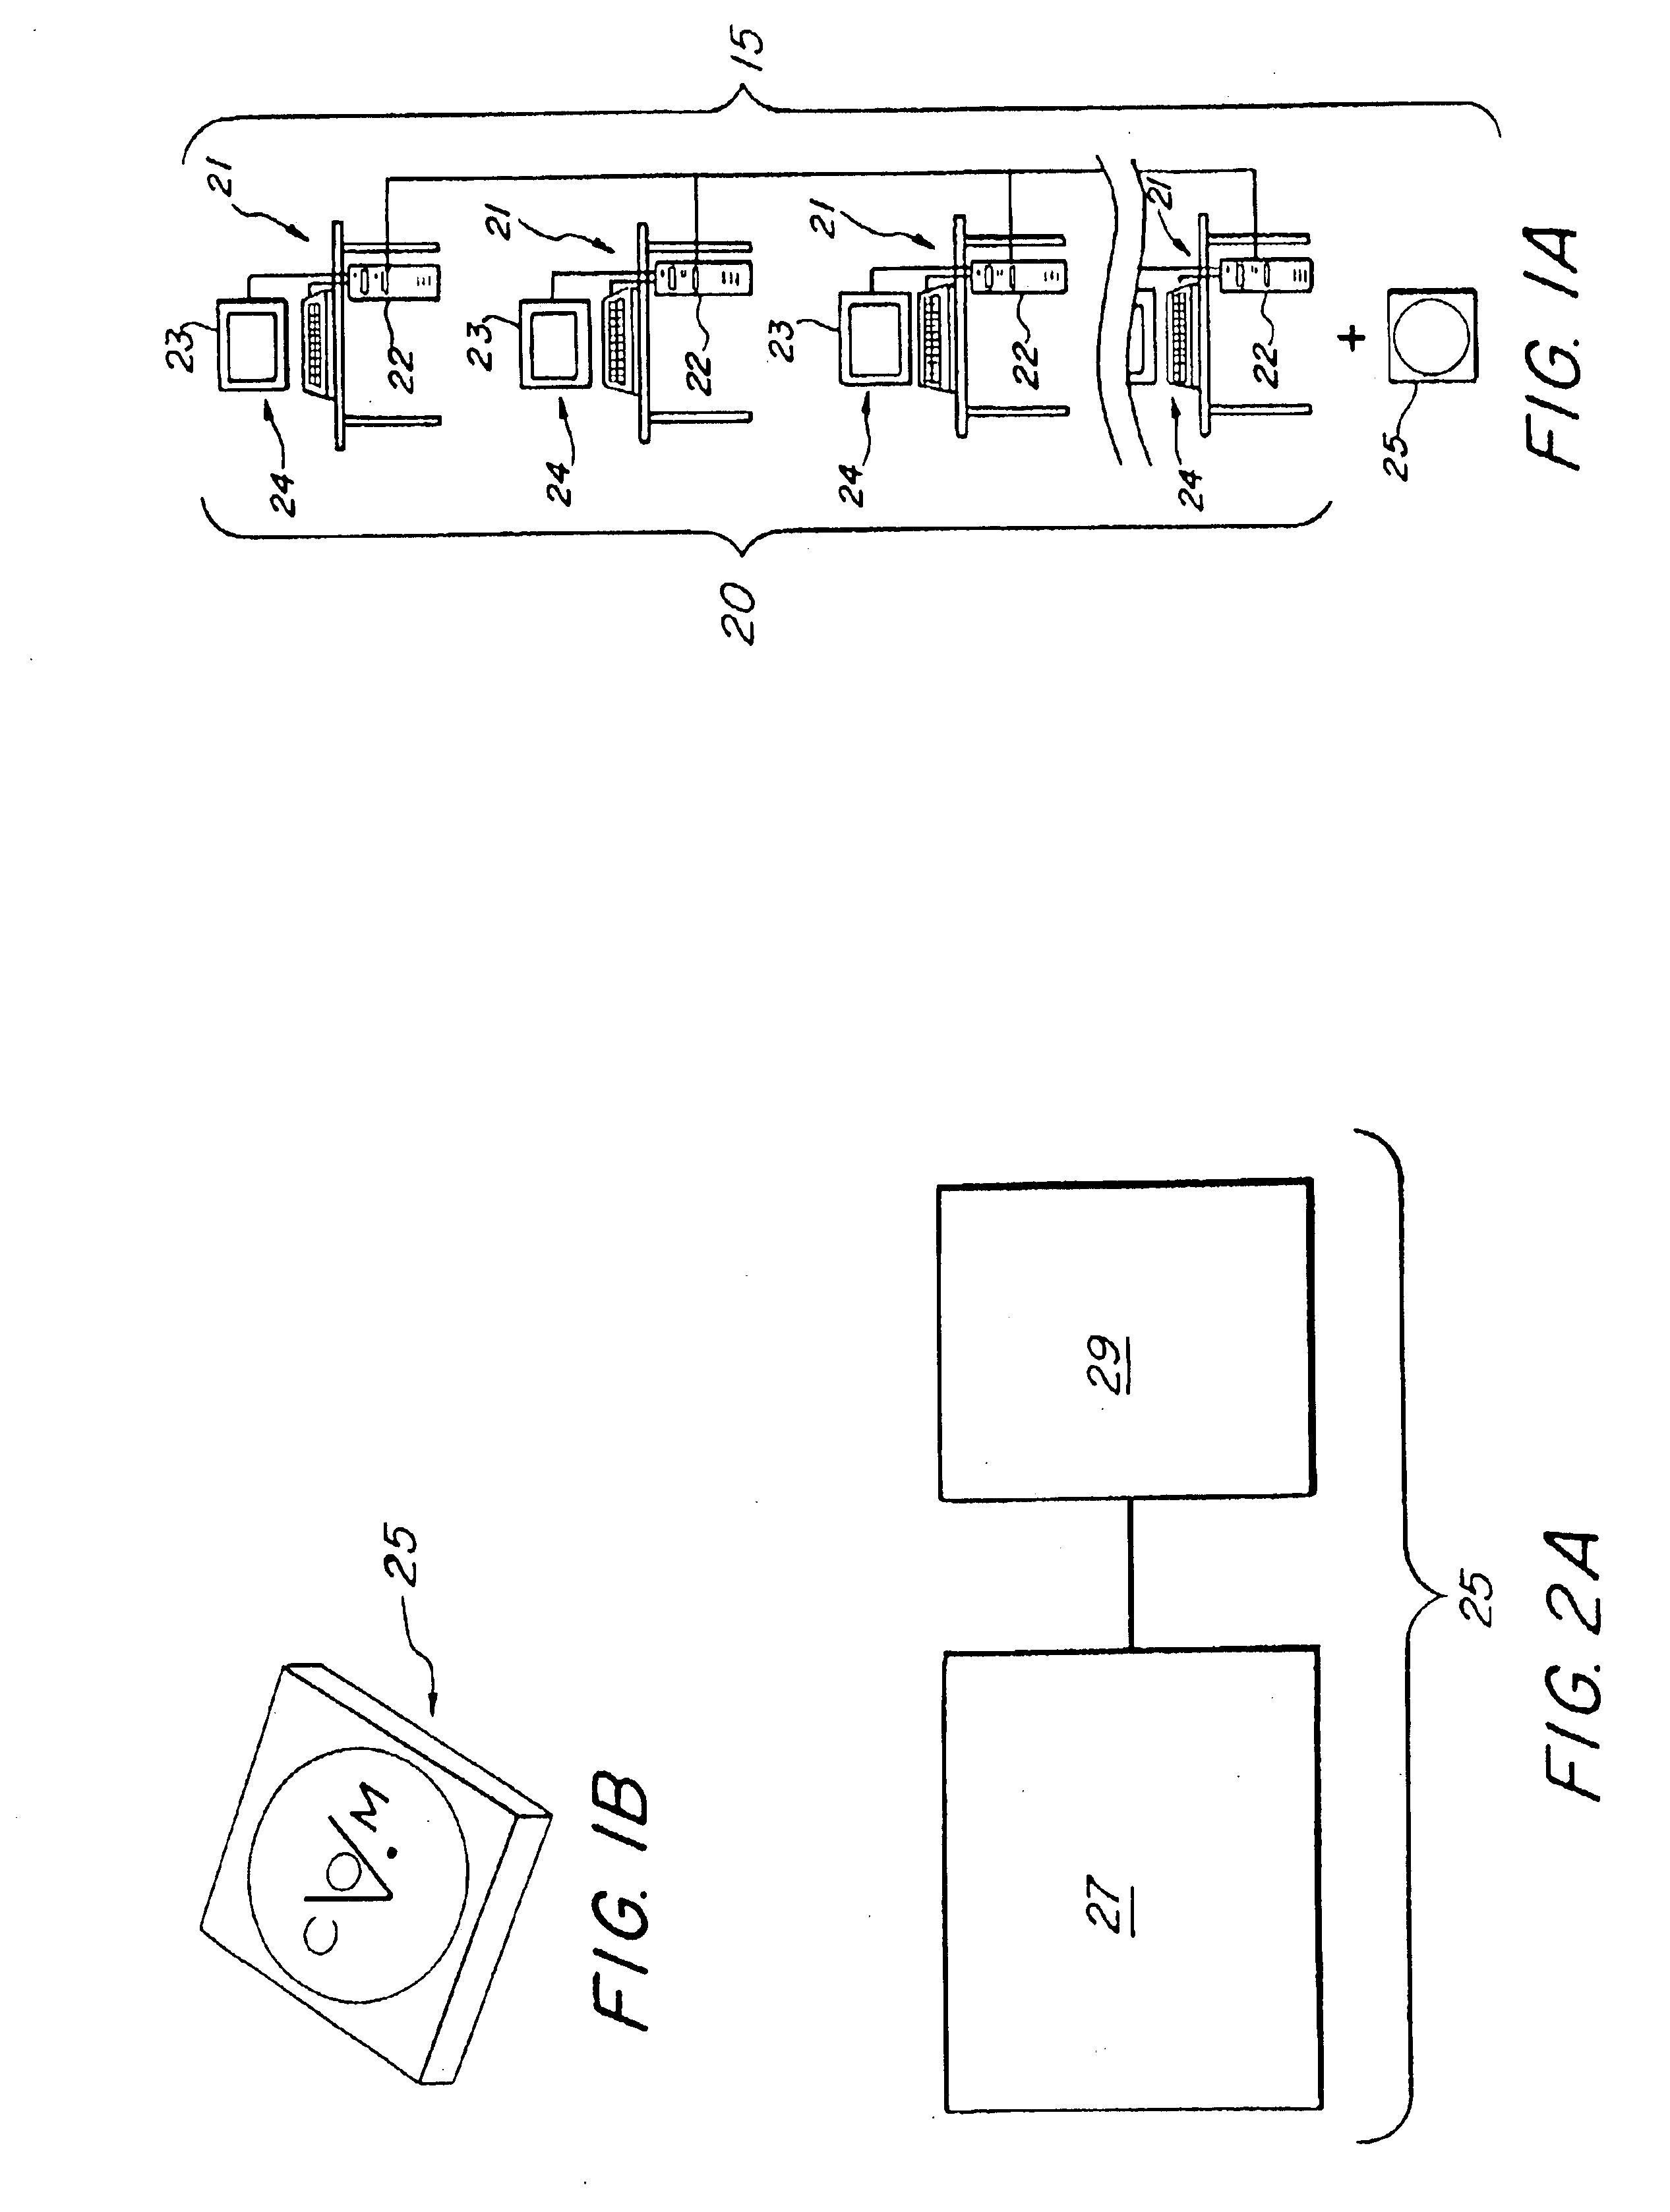 Network-based intercom system and method for simulating a hardware based dedicated intercom system